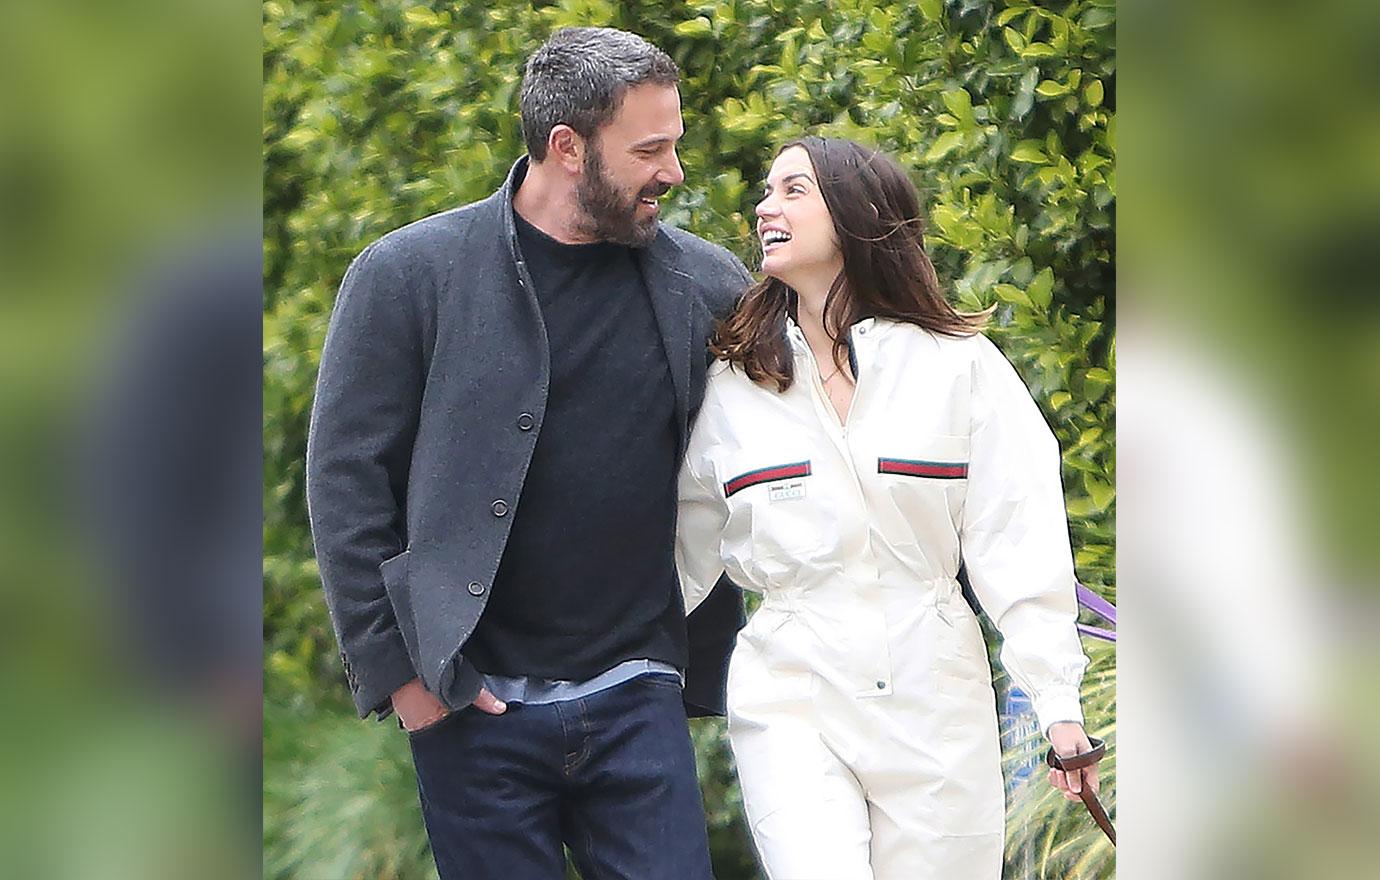 Ben Affleck and Ana de Armas' movie pulled from release after split